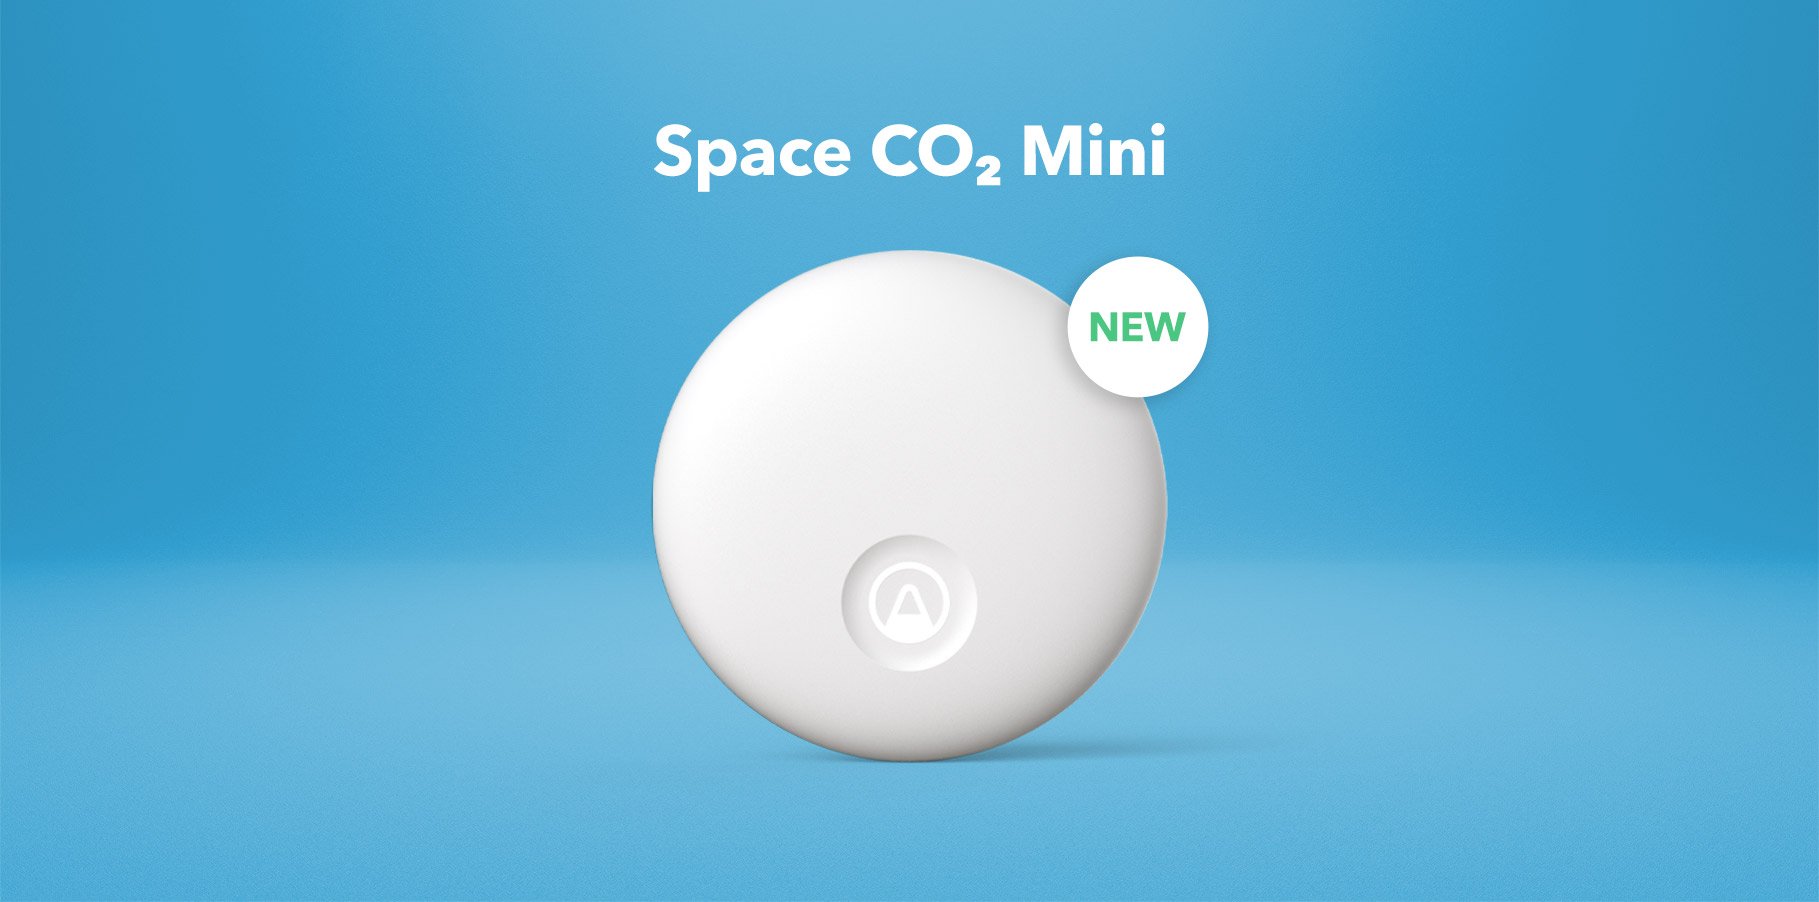 Airthings Debuts Space CO2 Mini, a Groundbreaking CO2 Monitor with